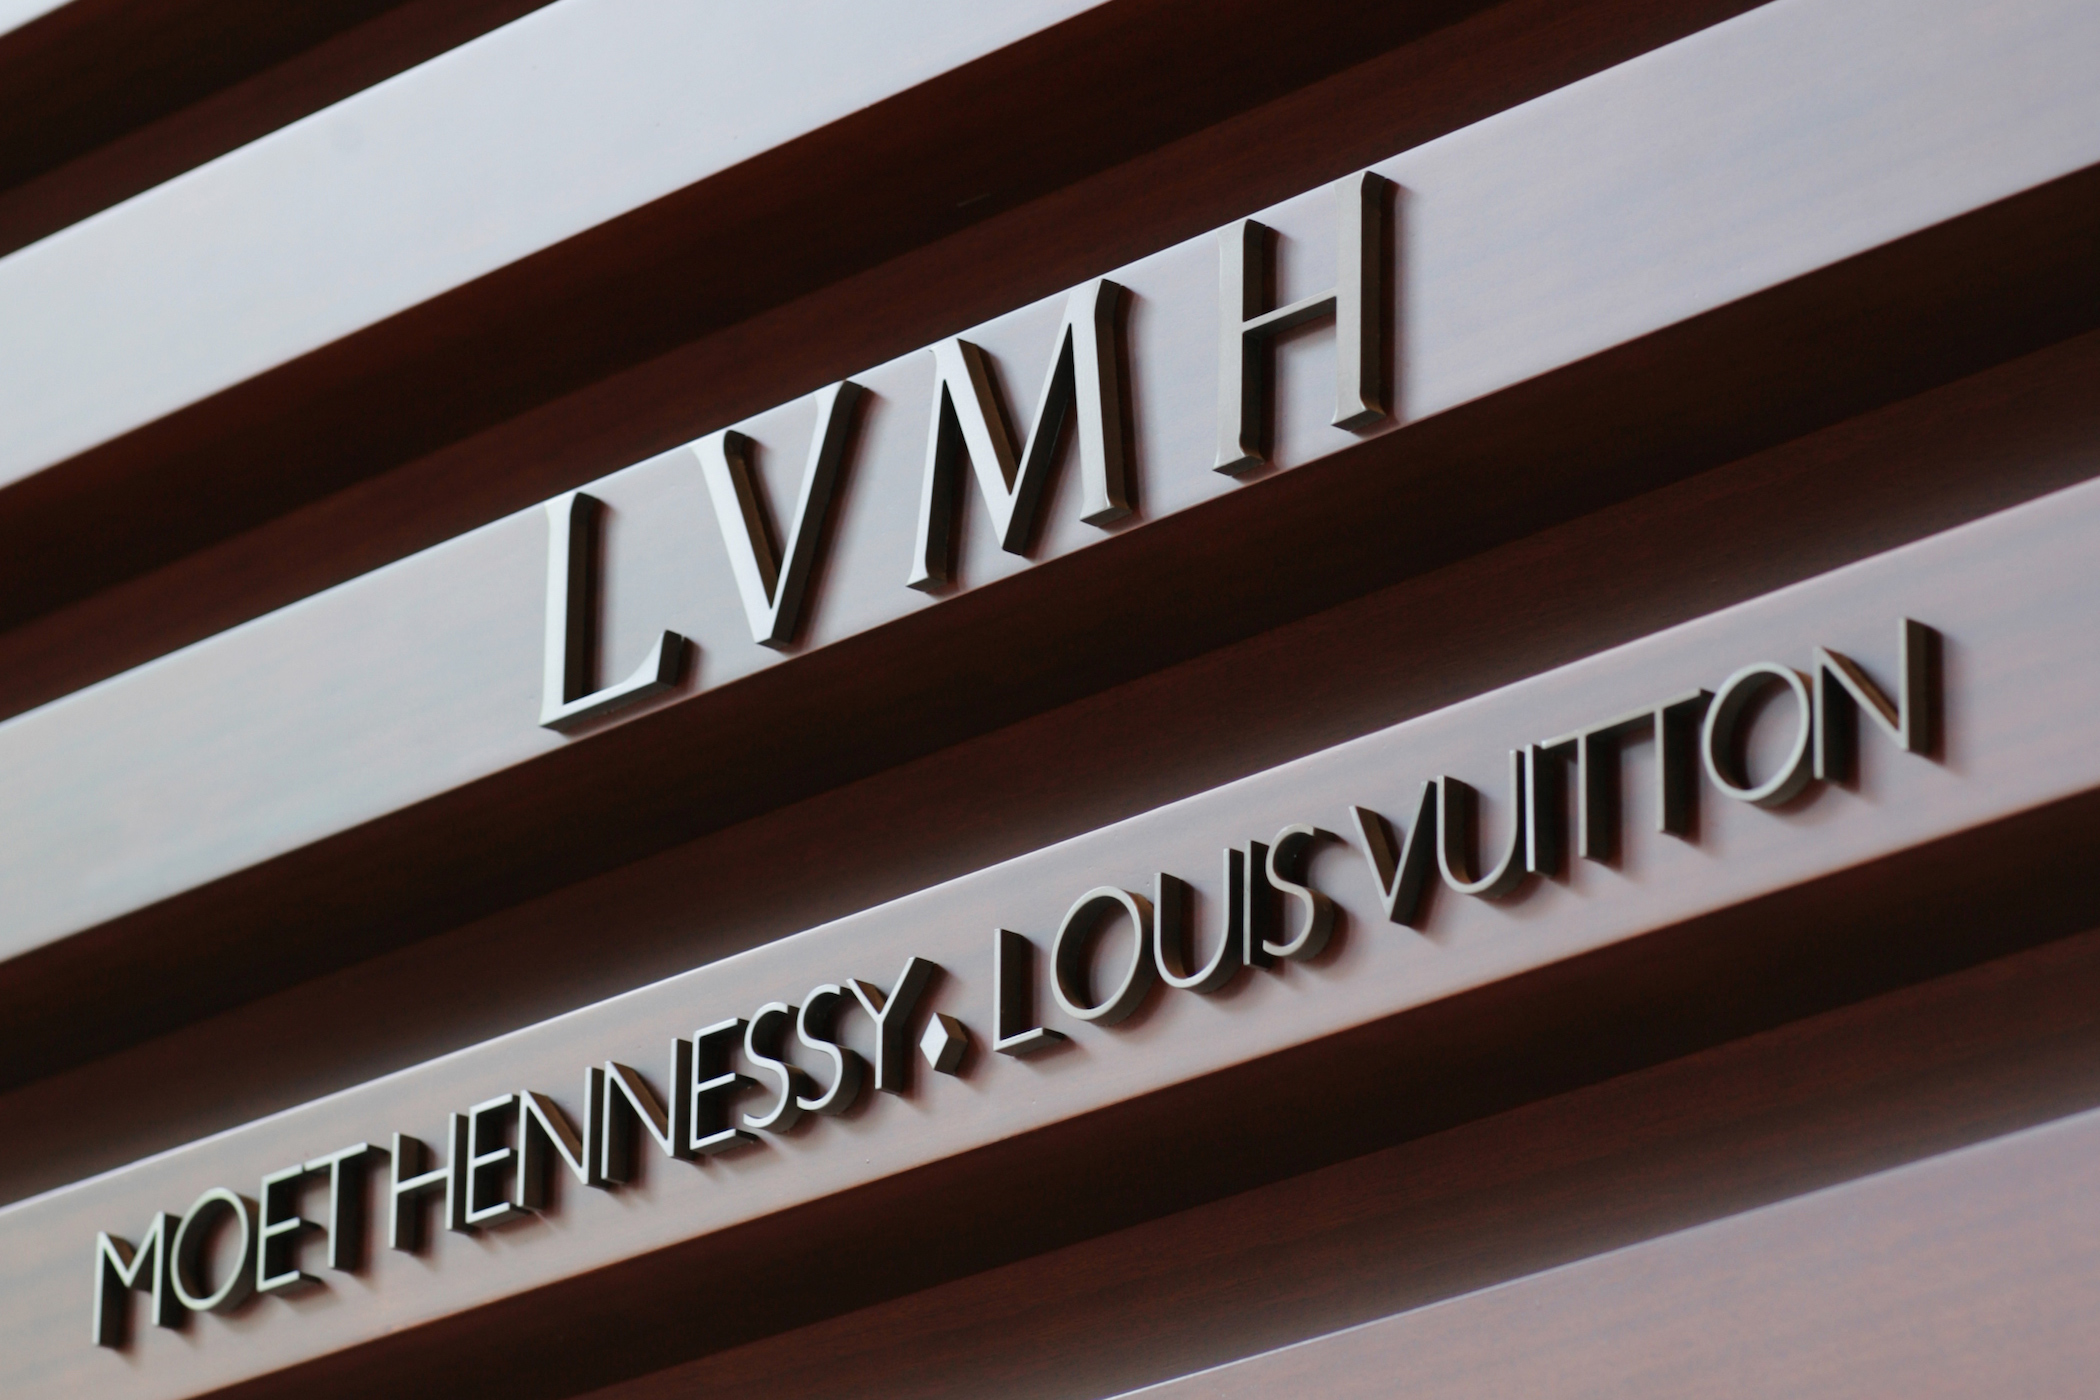 LVMH: Managing the Multi-brand Conglomerate - The Case Centre